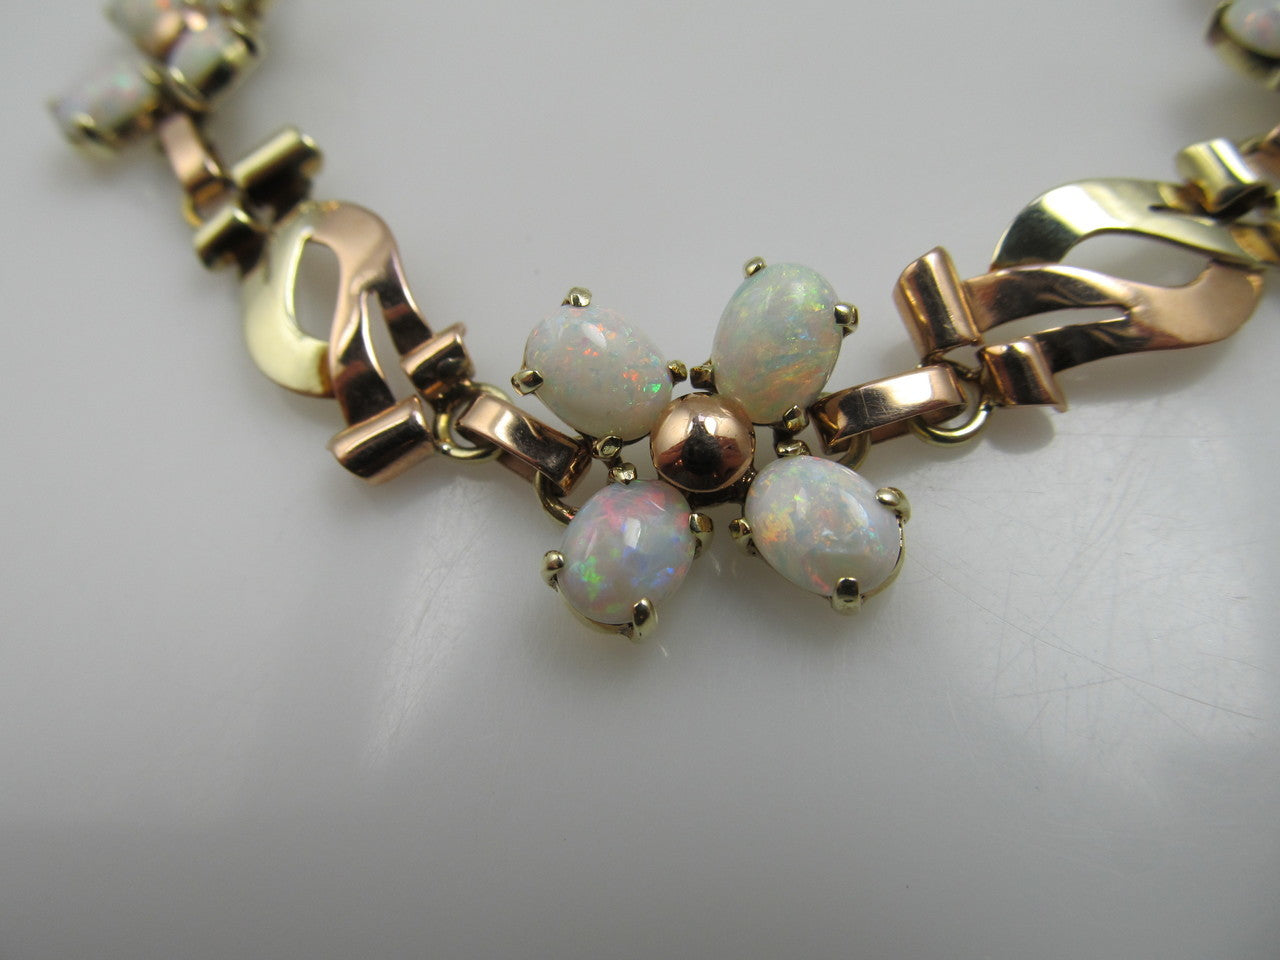 Vintage Retro 14k Rose And Yellow Gold Bracelet With Opals, Circa 1940